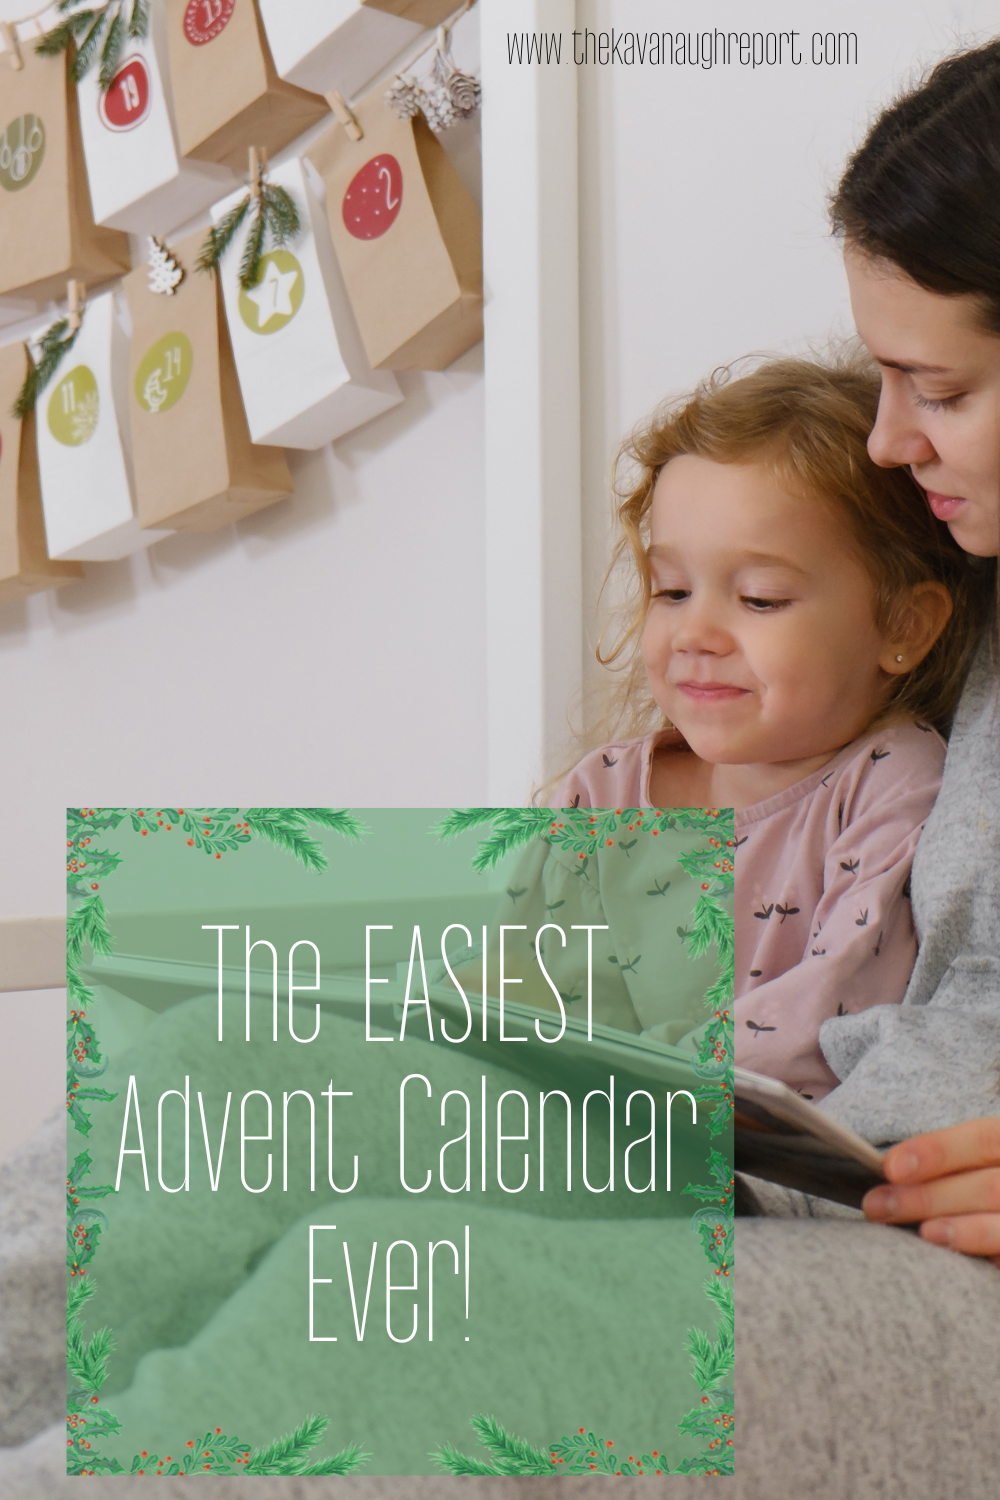 All you need is one Christmas book a day for this super easy advent calendar! Click to read all about how we use holiday books in our Montessori home as our advent calendar. Plus 24 great Montessori friendly book suggestions to try this advent season!